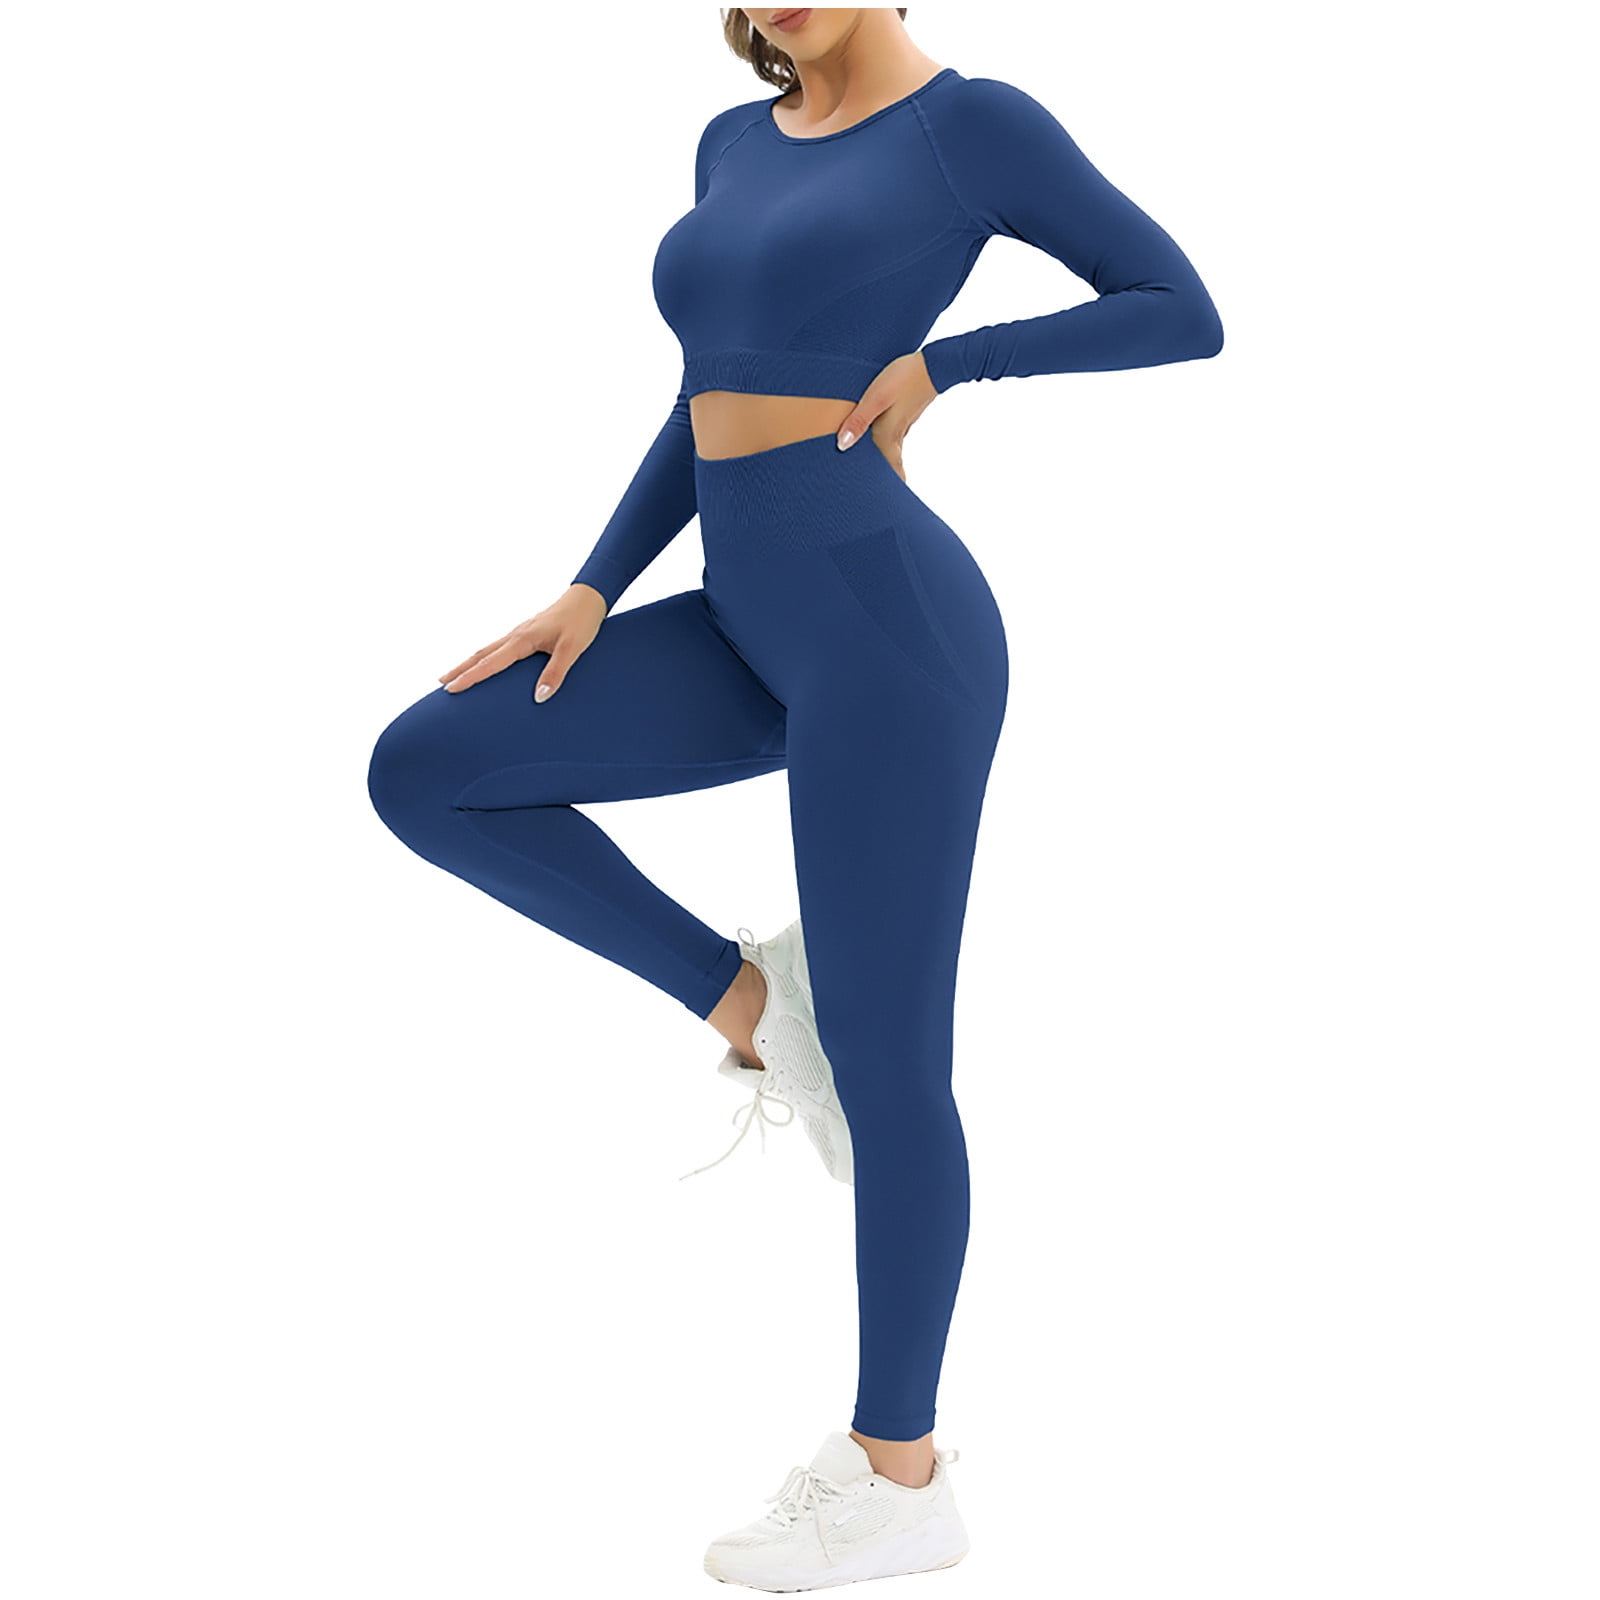  ECUPPER Women Long Sleeve Workout Tops Backless Yoga Gym Shirts  Athletic Crop Top with Built in Bra for Fitness Sports Activewear Blue :  Clothing, Shoes & Jewelry